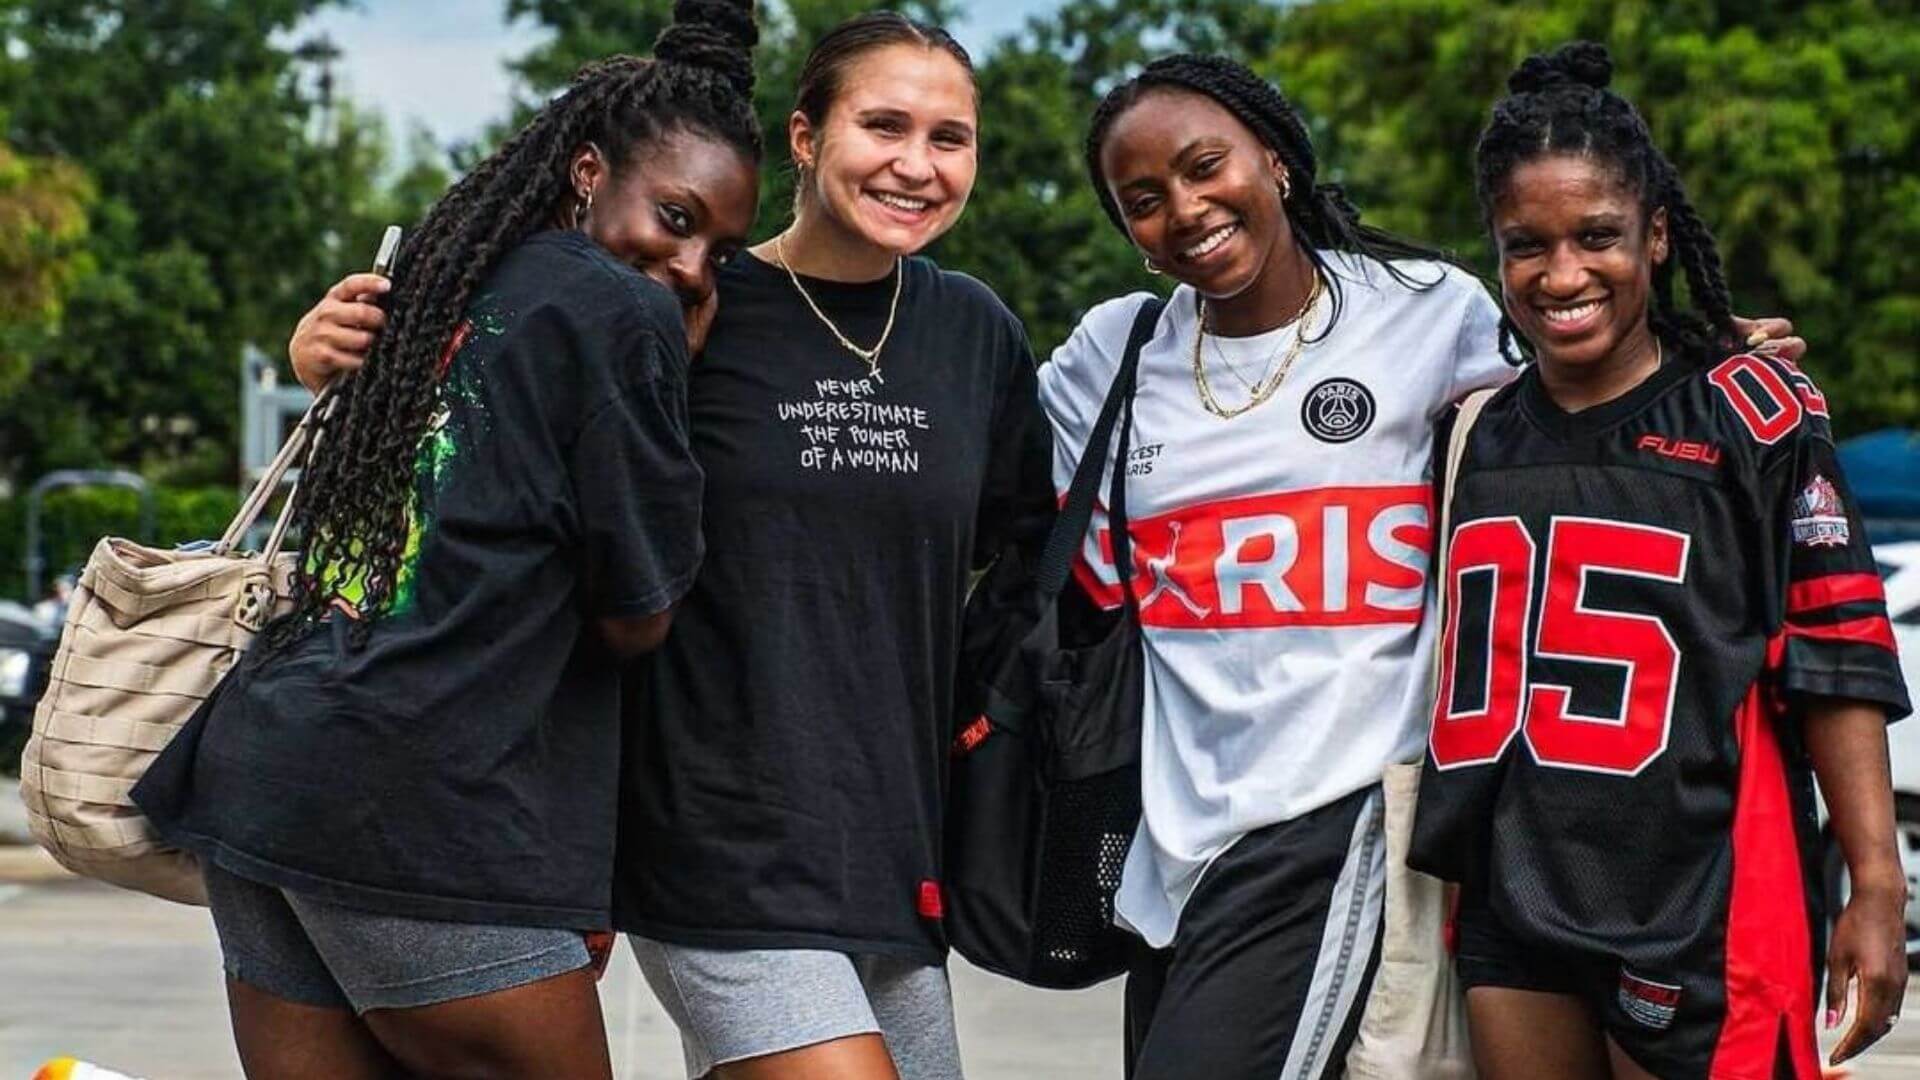 The NWSL inspires a lot of women's soccer clothing trends.